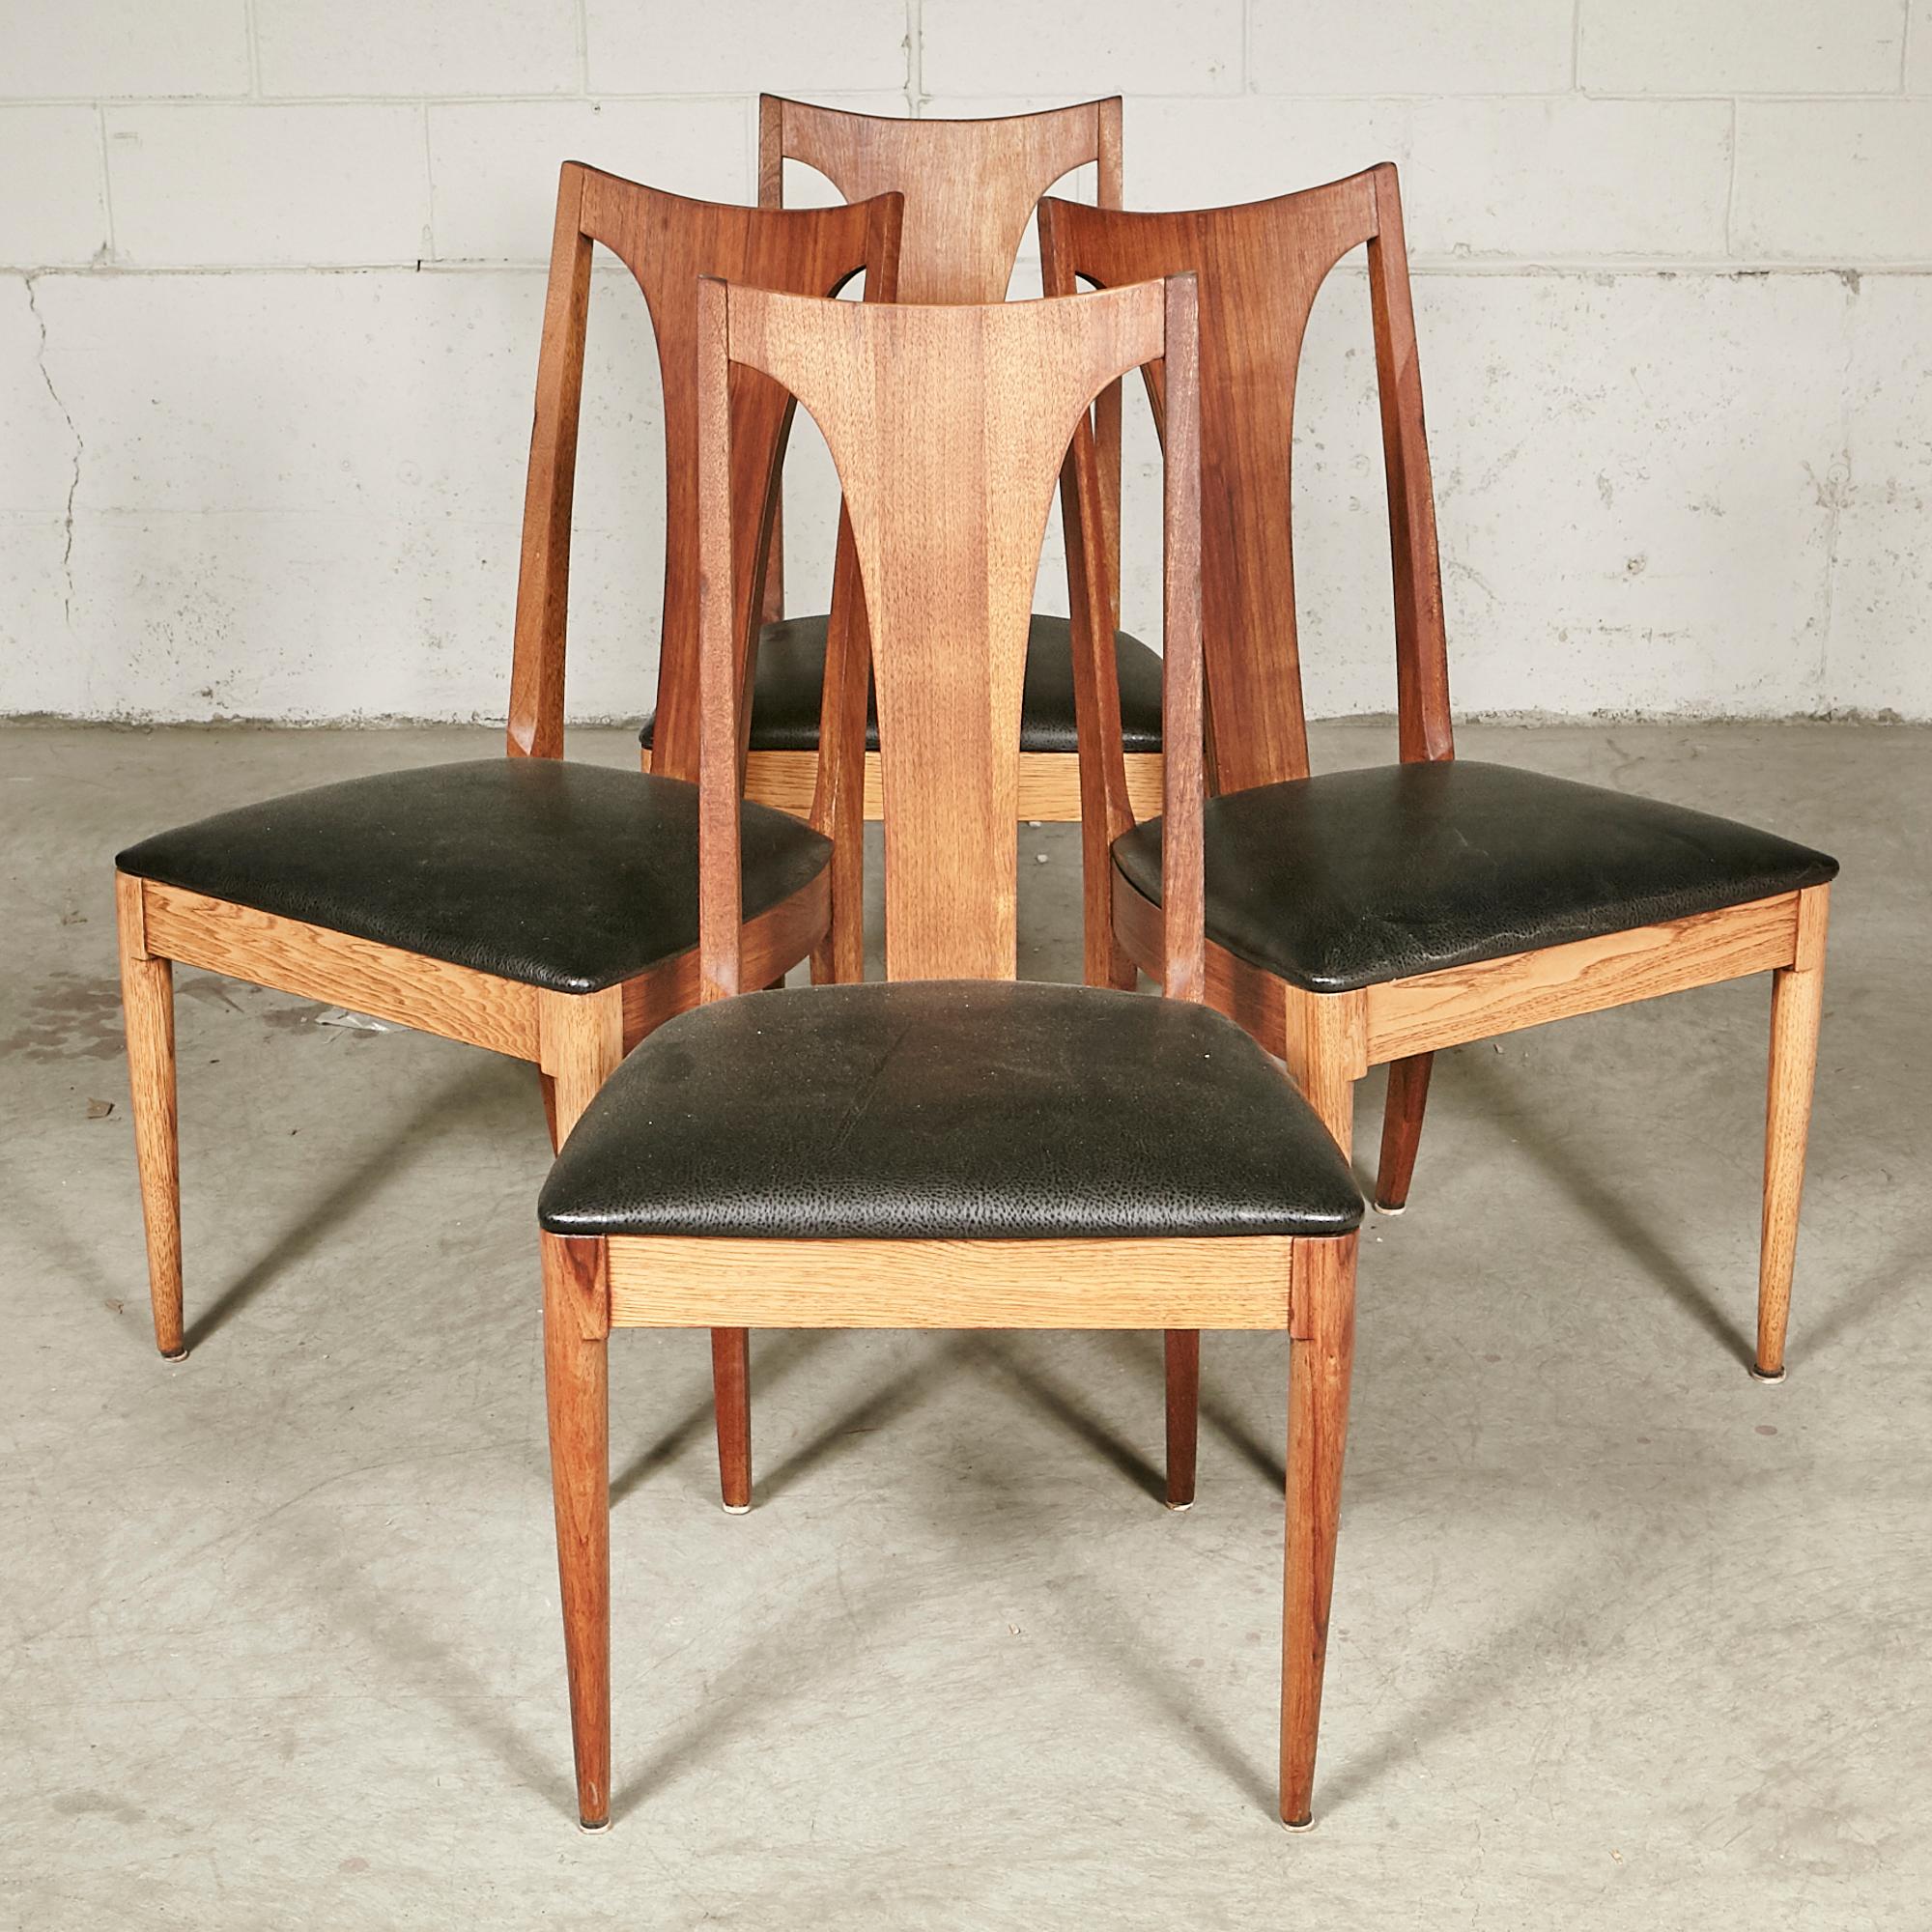 Vintage 1960s set of 4 walnut wood high back Brasilia-style dining room chairs. Chairs are in newly refinished condition. Seat: 18.5in.H. No maker's mark.
               